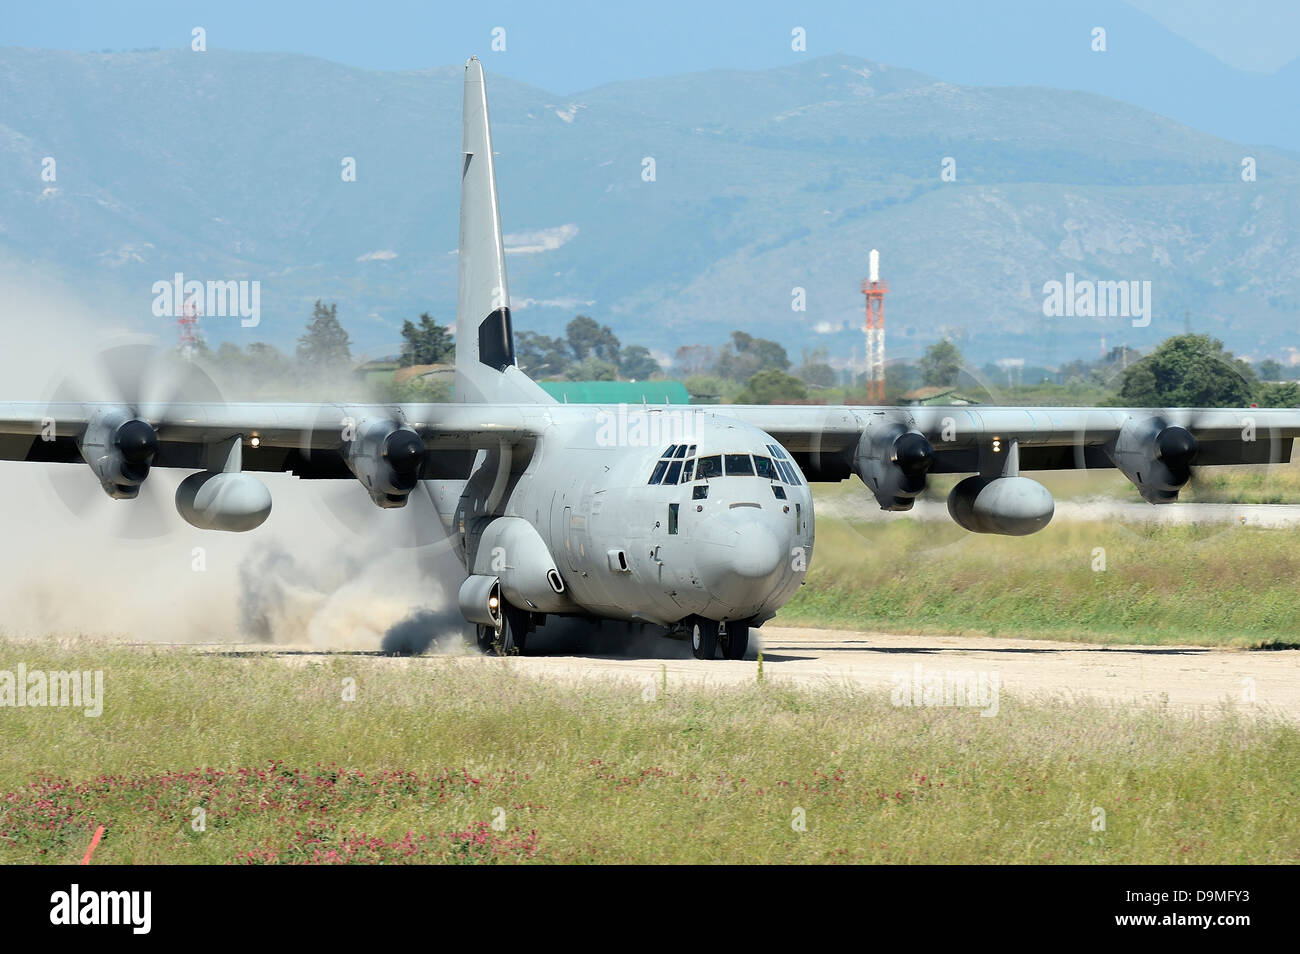 May 9, 2013 - A C-130 Hercules of the Italian Air Force landing on an unpaved landing strip, Grazzanise, Italy. Stock Photo